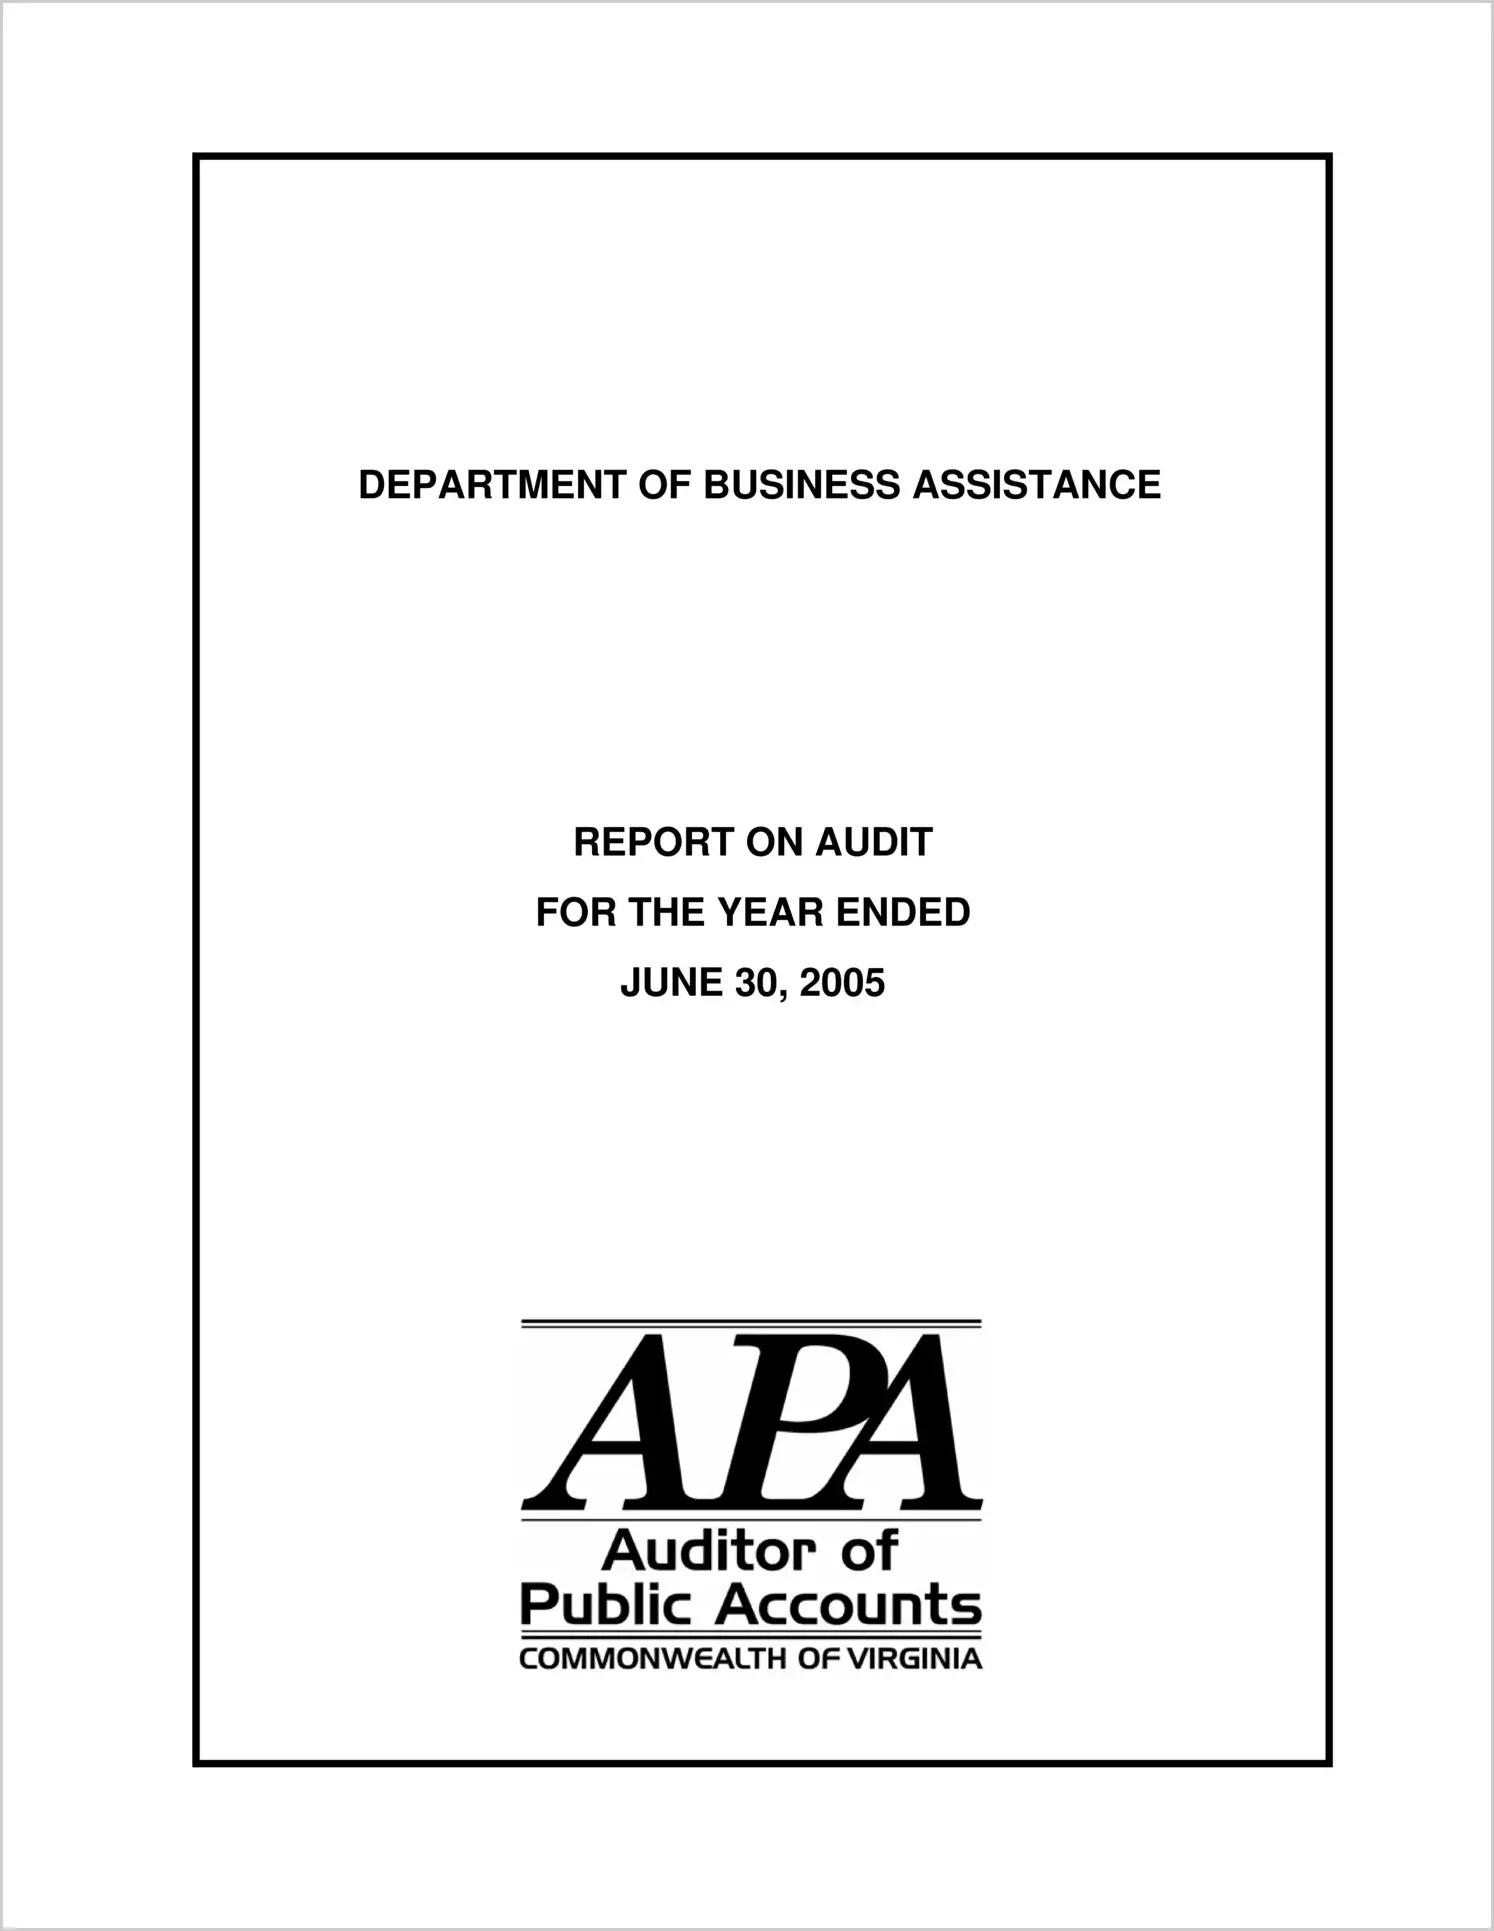 Department of Business Assistance for the year ended June 30, 2005